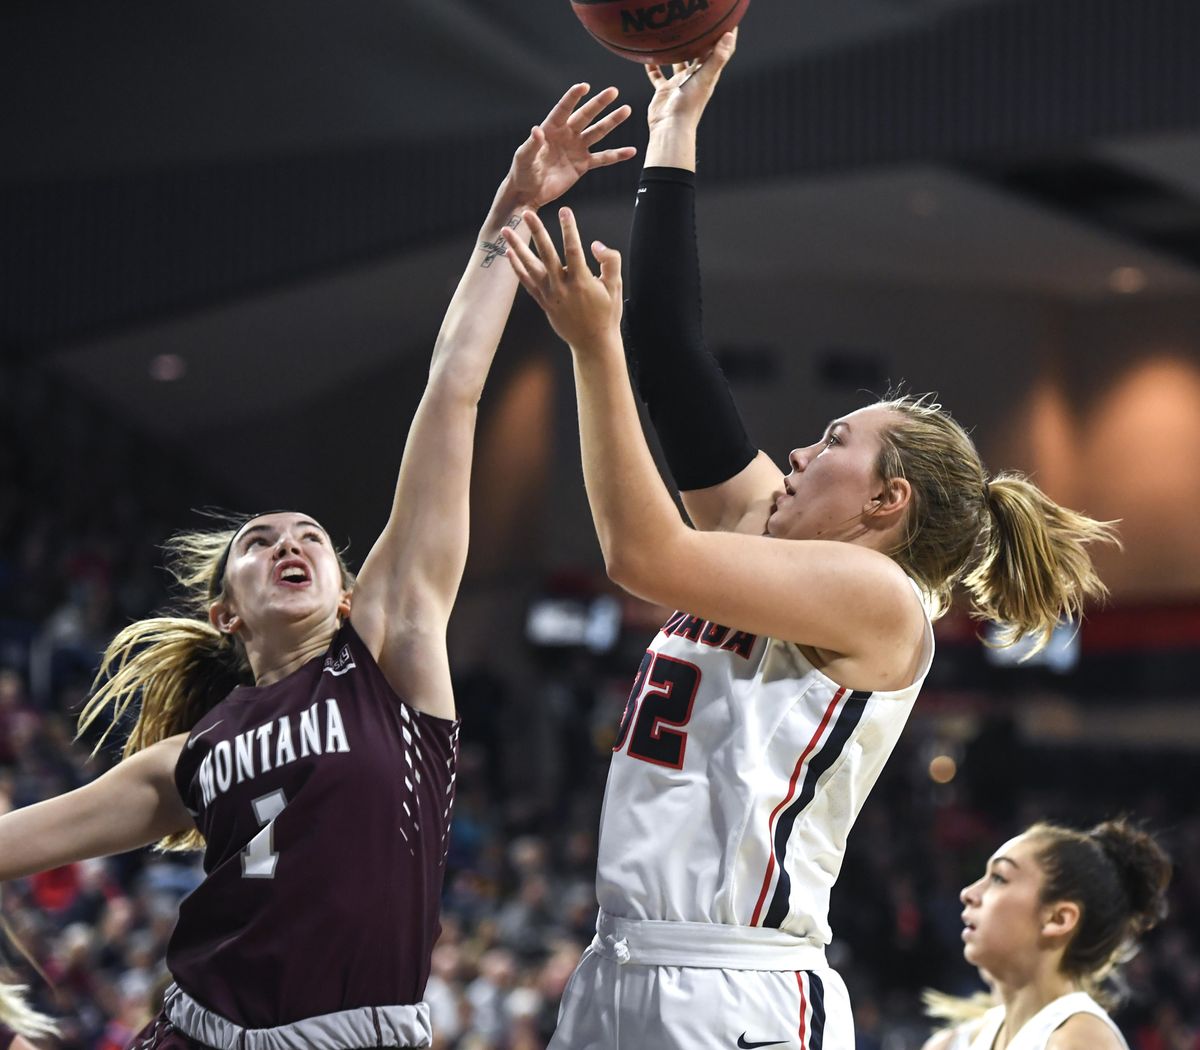 Gonzaga guard Jill Townsend (32) fires over Montana guard Katie Mayhue (1), Wednesday, Nov. 7, 2018, in the McCarthey Athletic Center. (Dan Pelle / The Spokesman-Review)